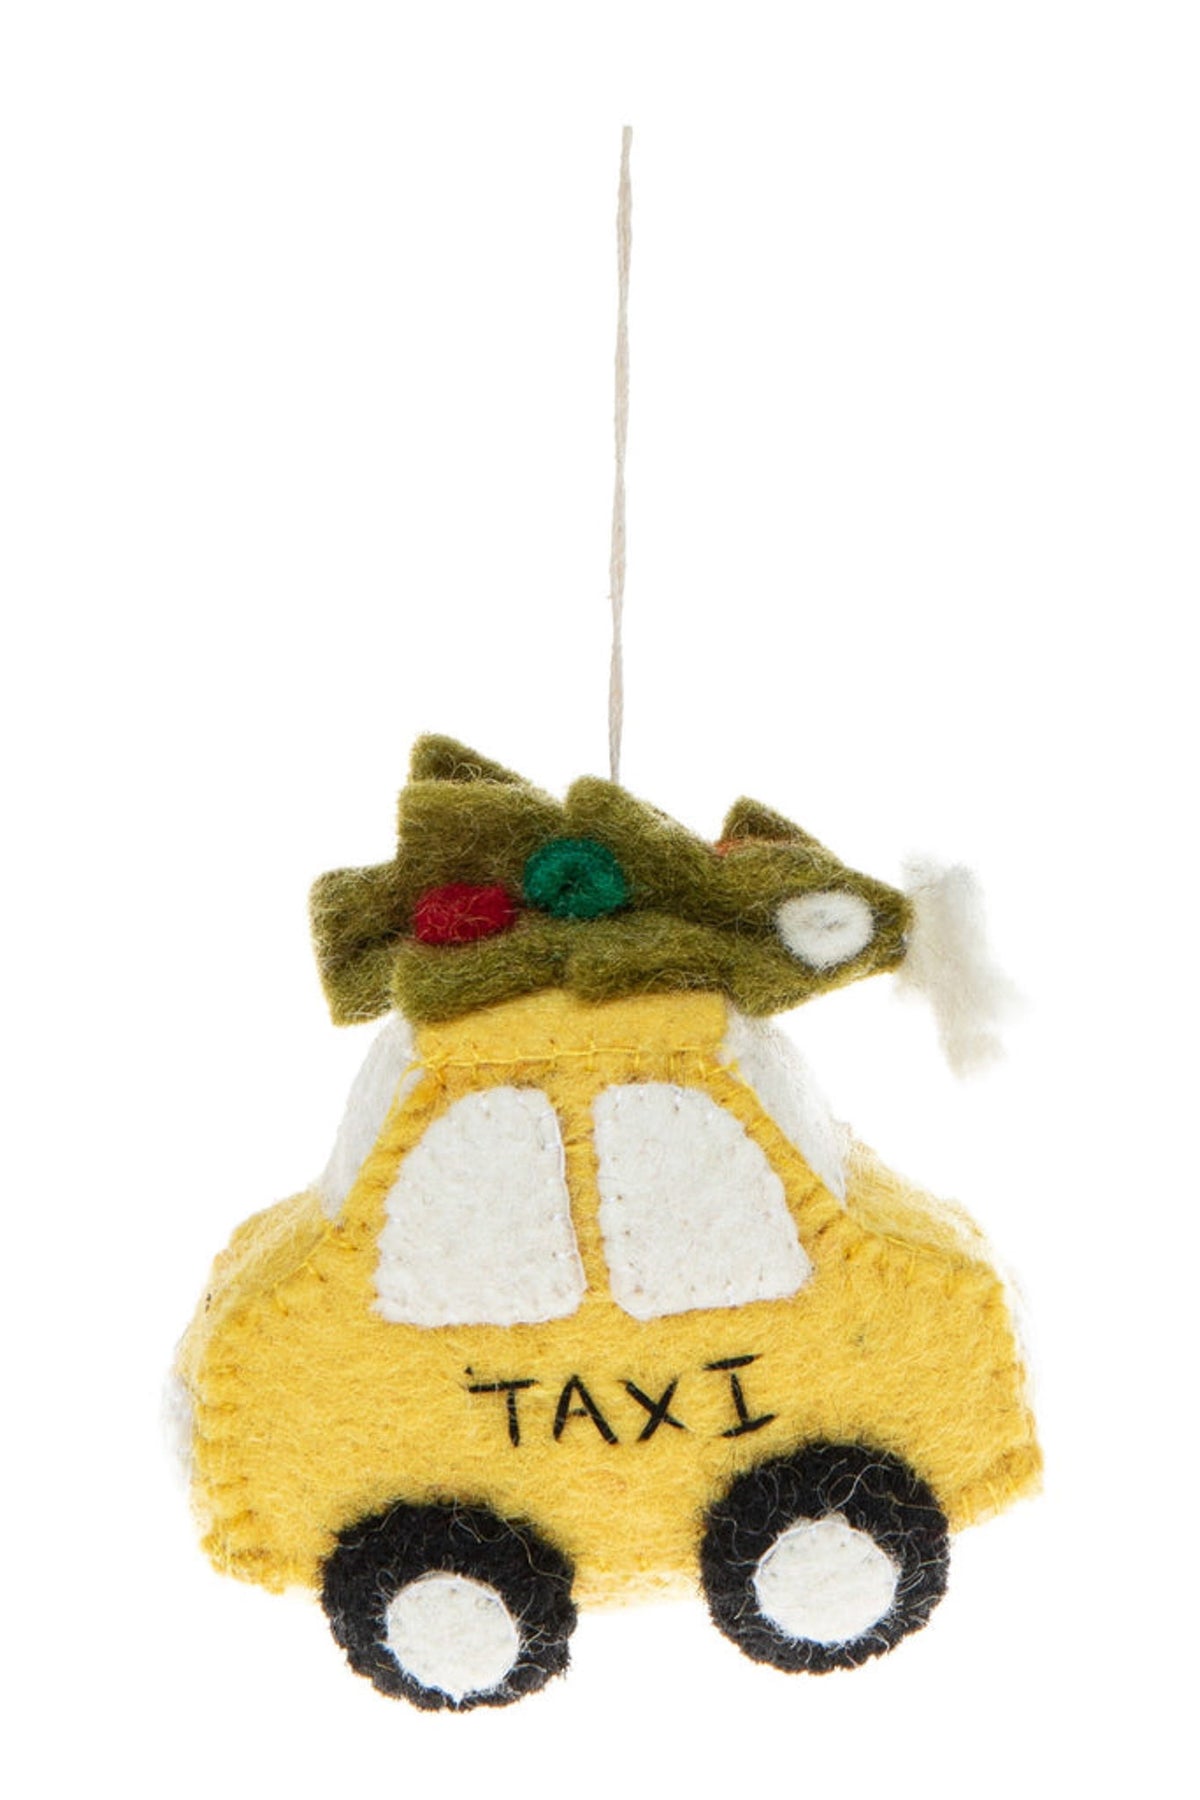 Global Goods Partners NYC Taxi with Tree Ornament